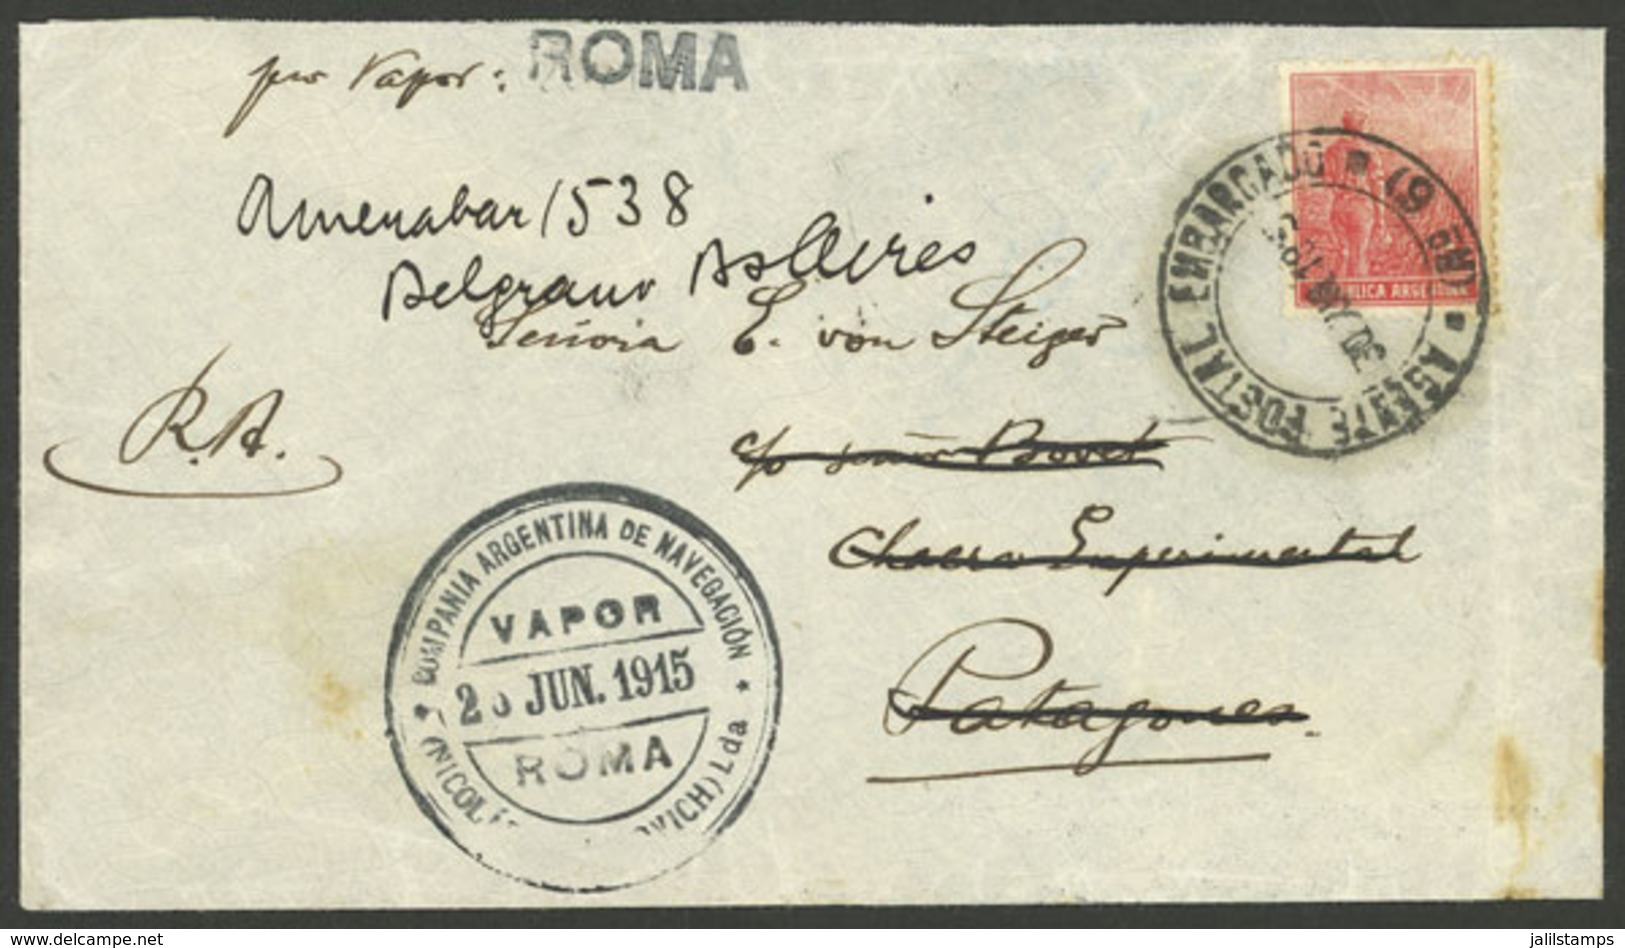 ARGENTINA: PATAGONIA MAIL BY SHIP: Cover Sent From PUERTO MADRYN (Chubut) Originally To PATAGONES (Río Negro) On 24/JUN/ - Briefe U. Dokumente